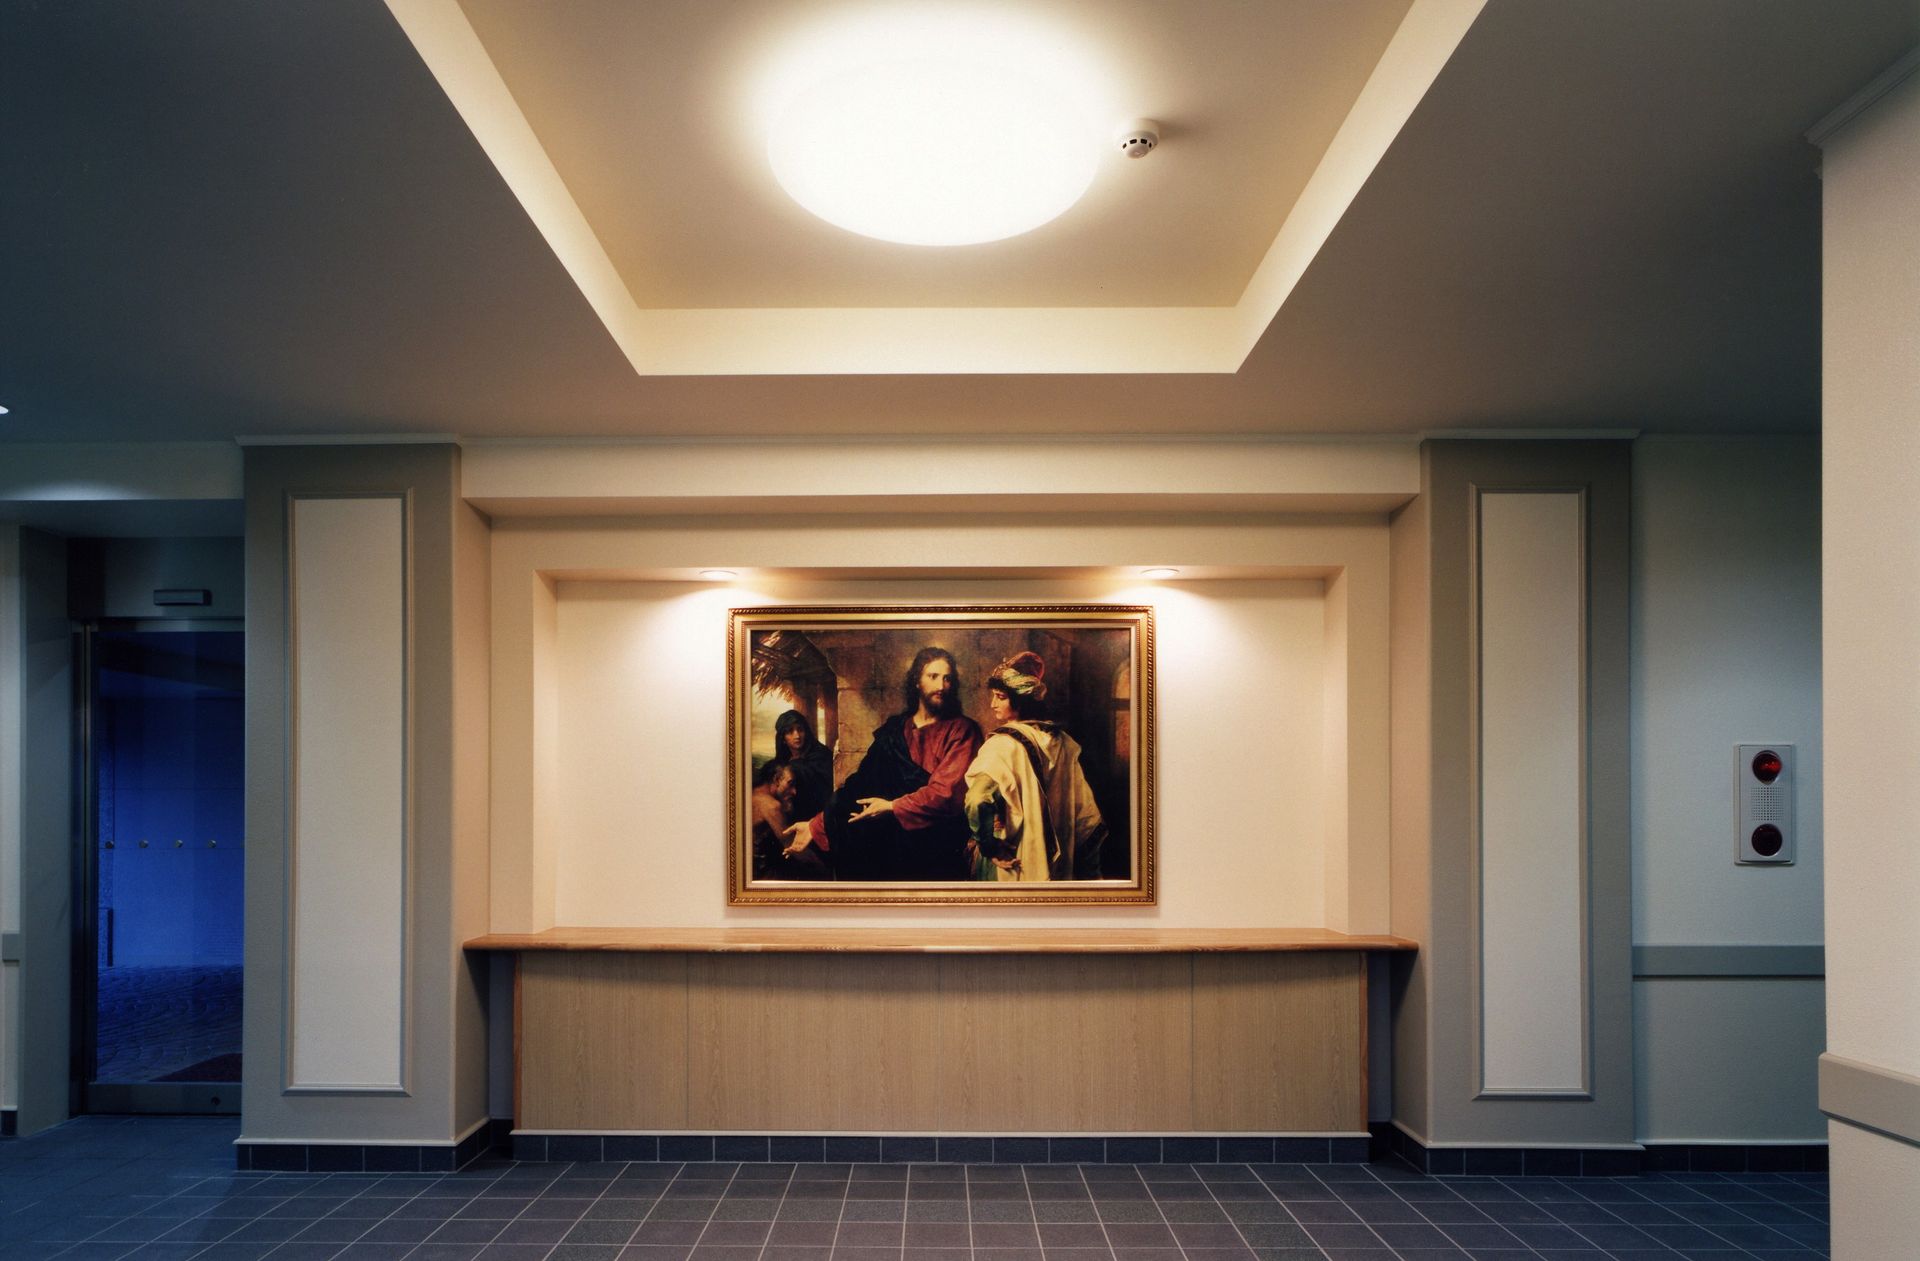 A meetinghouse foyer with a light shining on a painting of Christ.